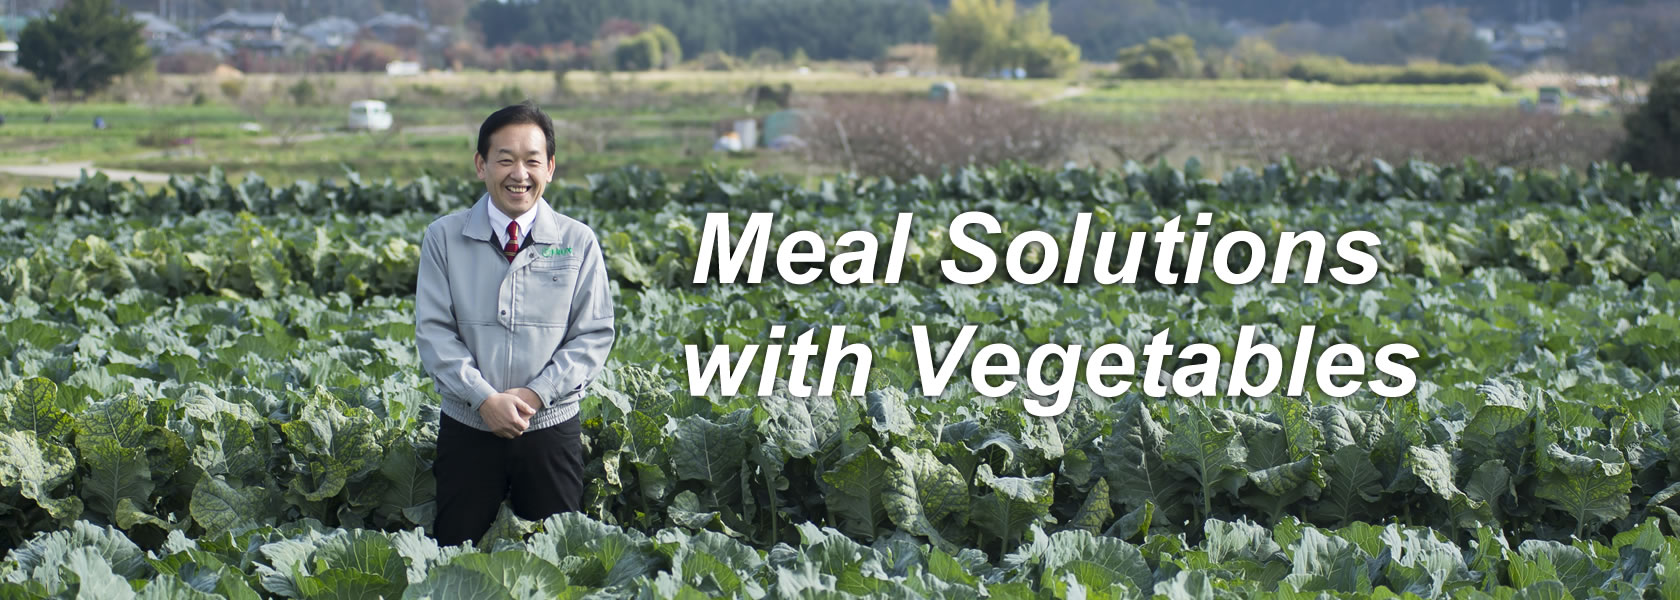 Meal Solutions with Vegetables